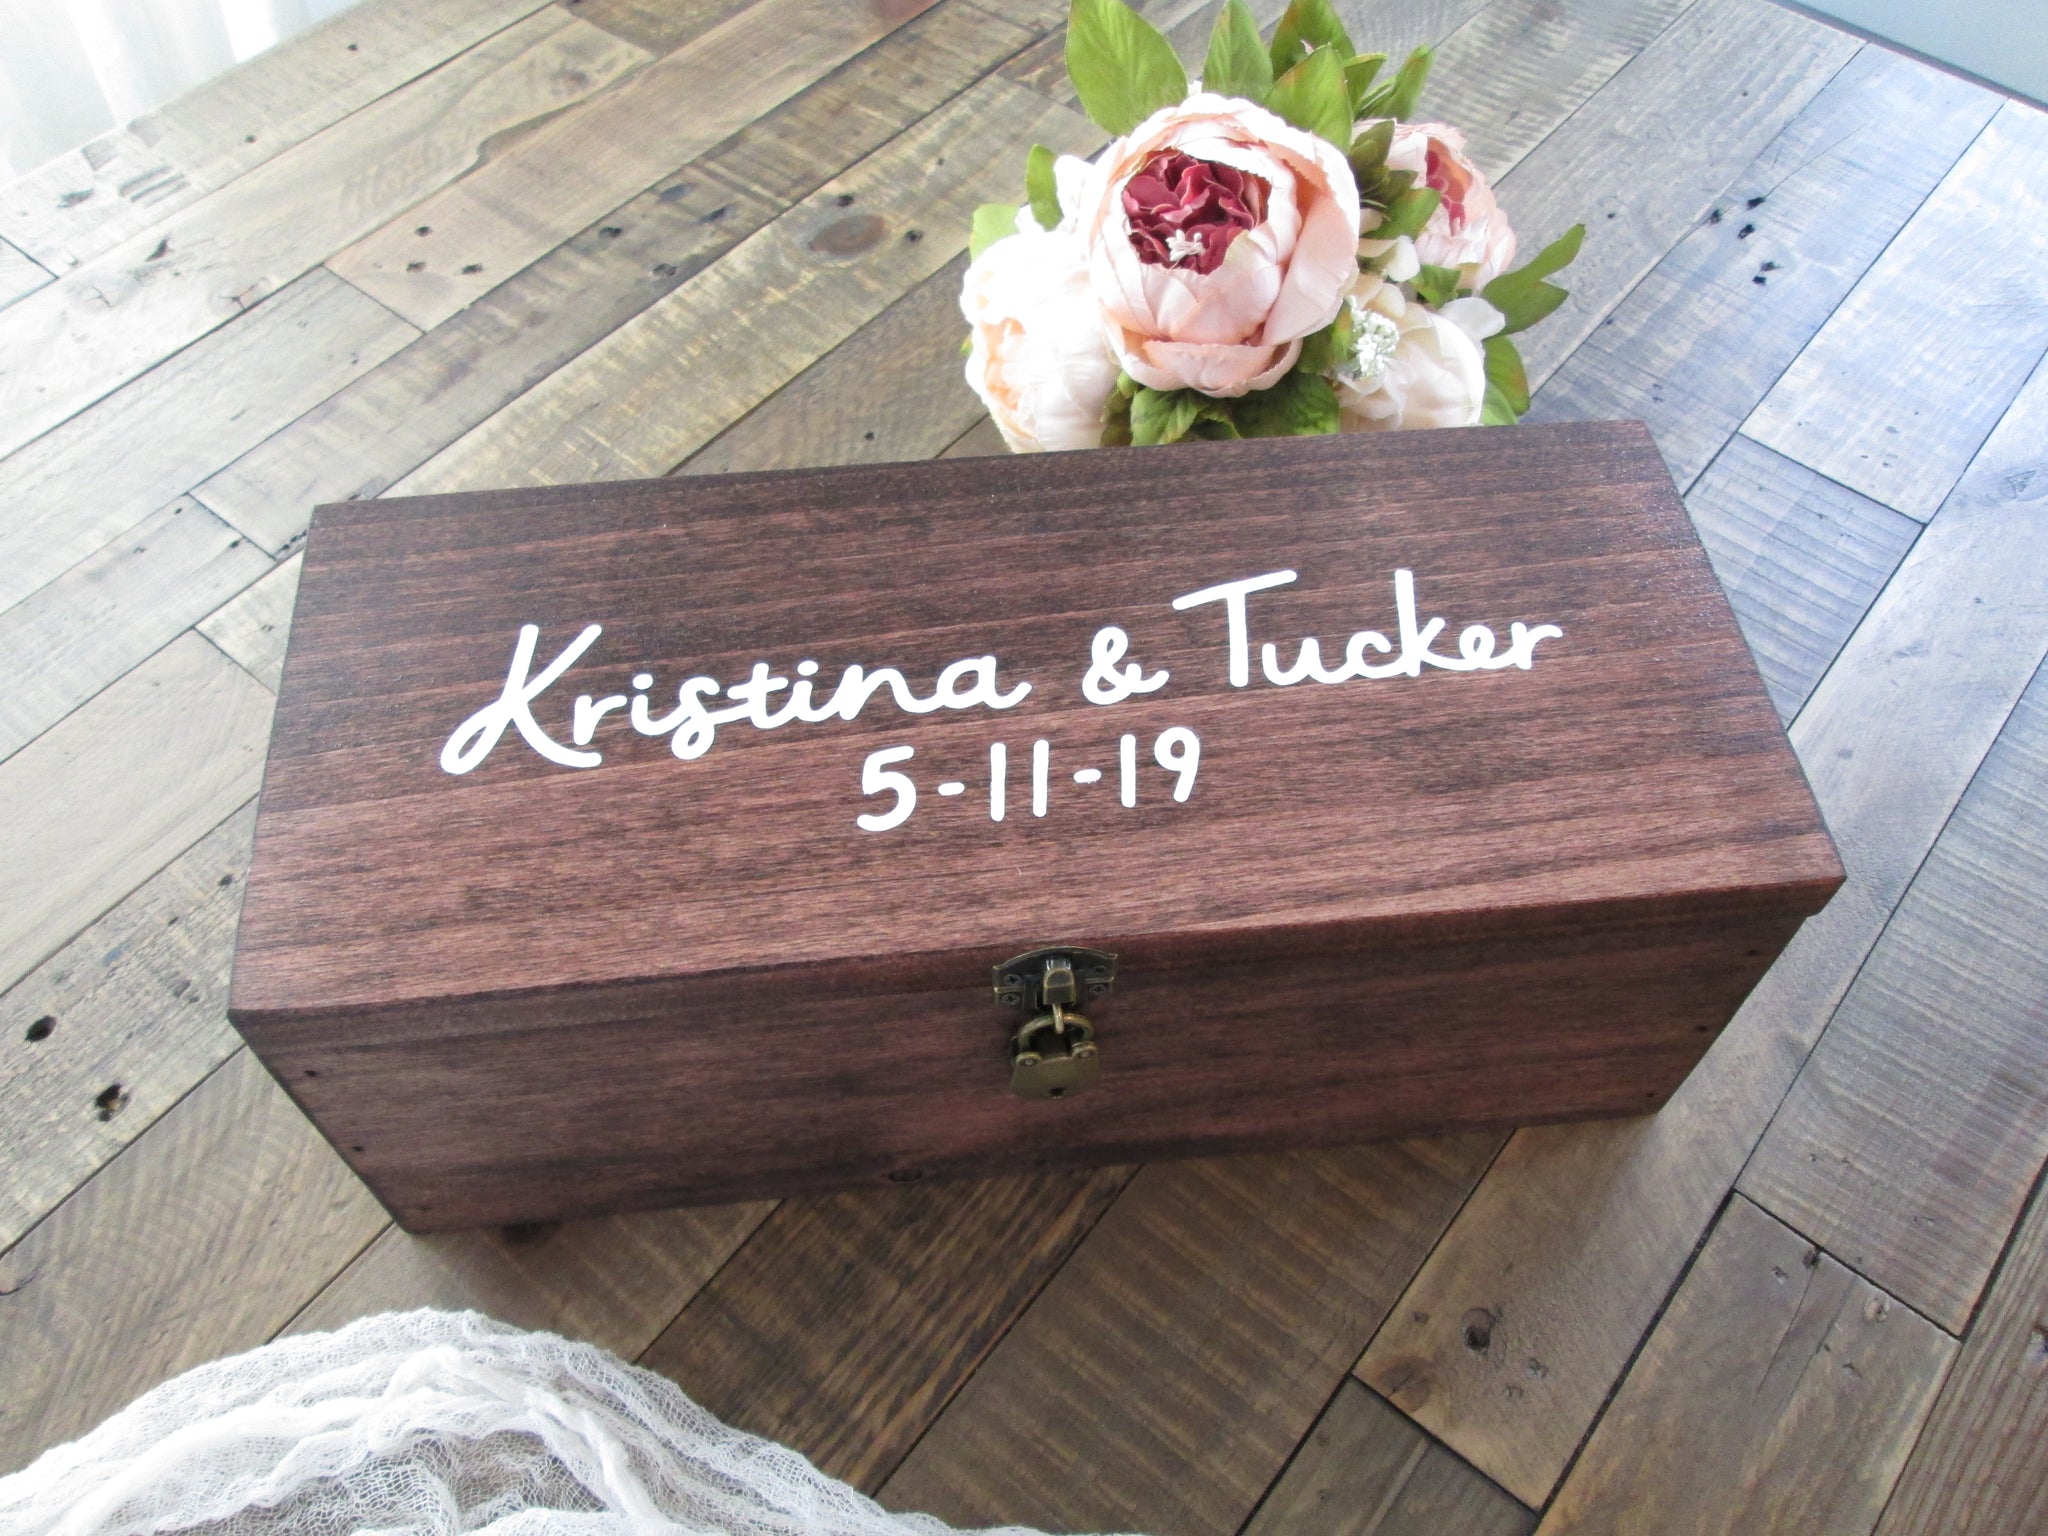 Wooden Wine Box, Wine Box, Wedding Wine Box, Wedding Gift for